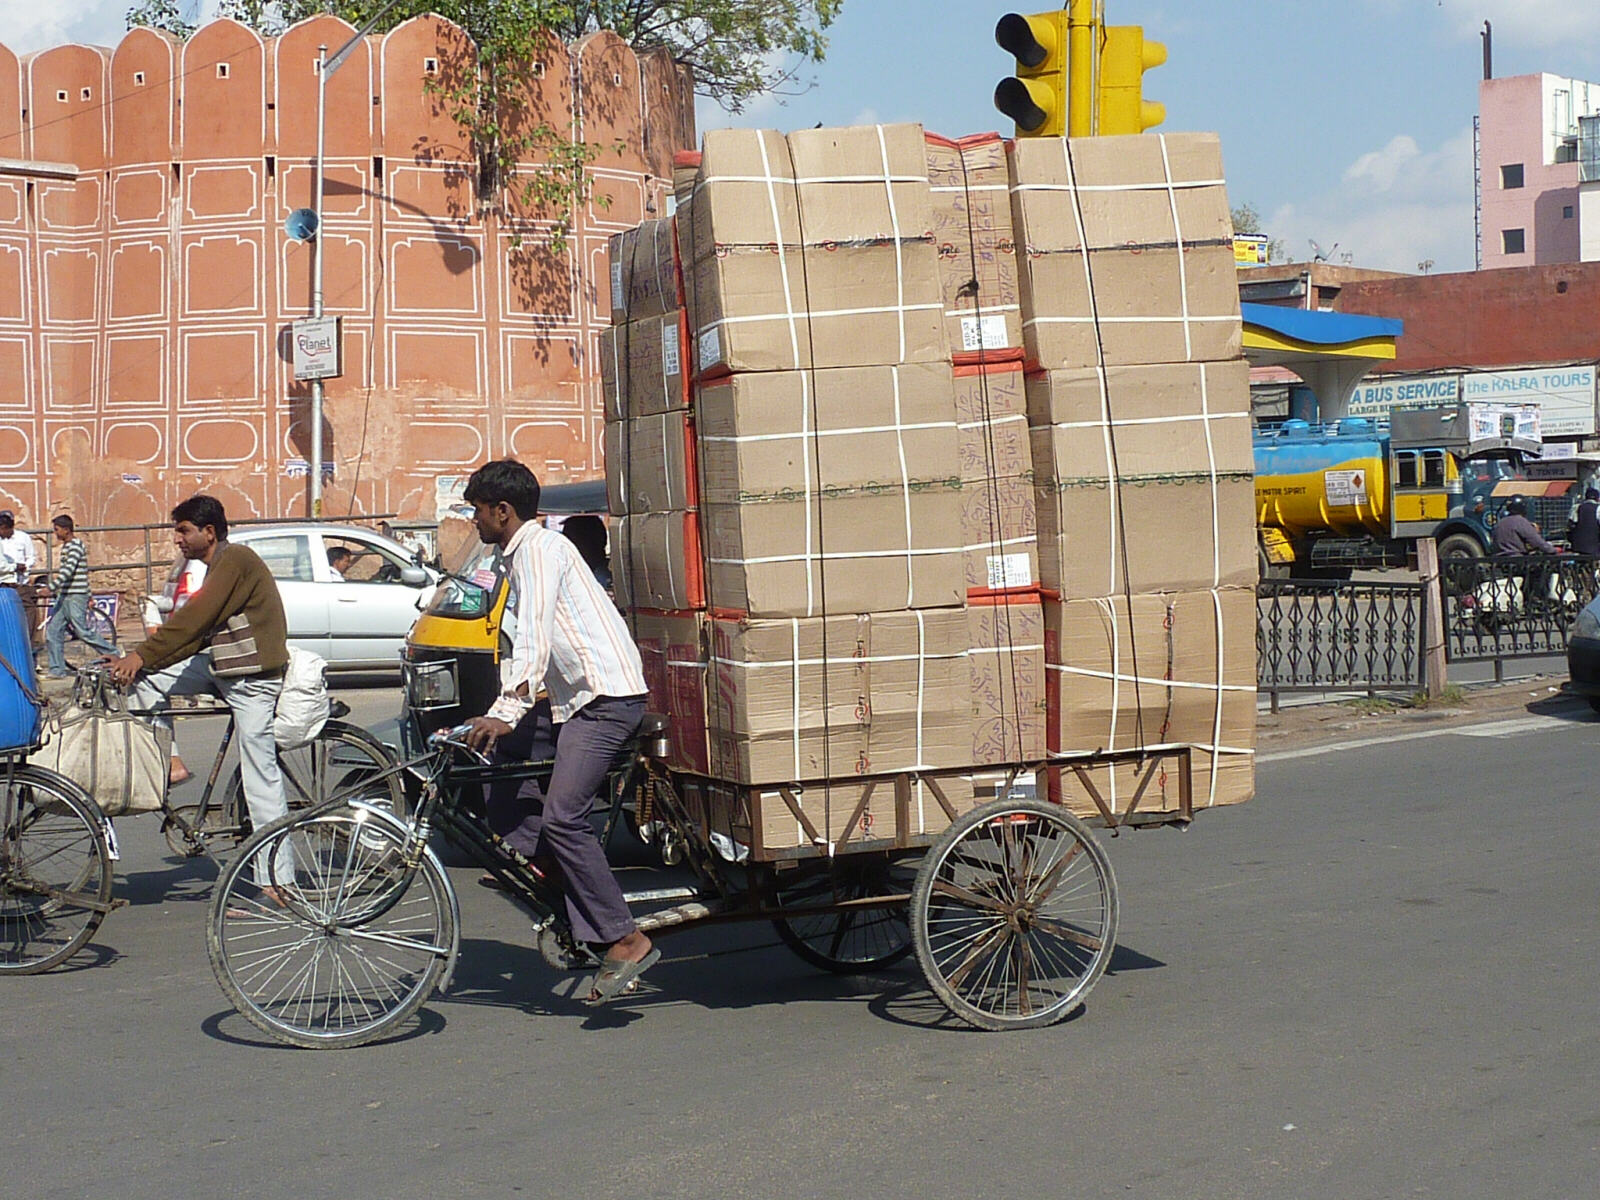 A well-loaded bicycle in Jaipur, Rajasthan